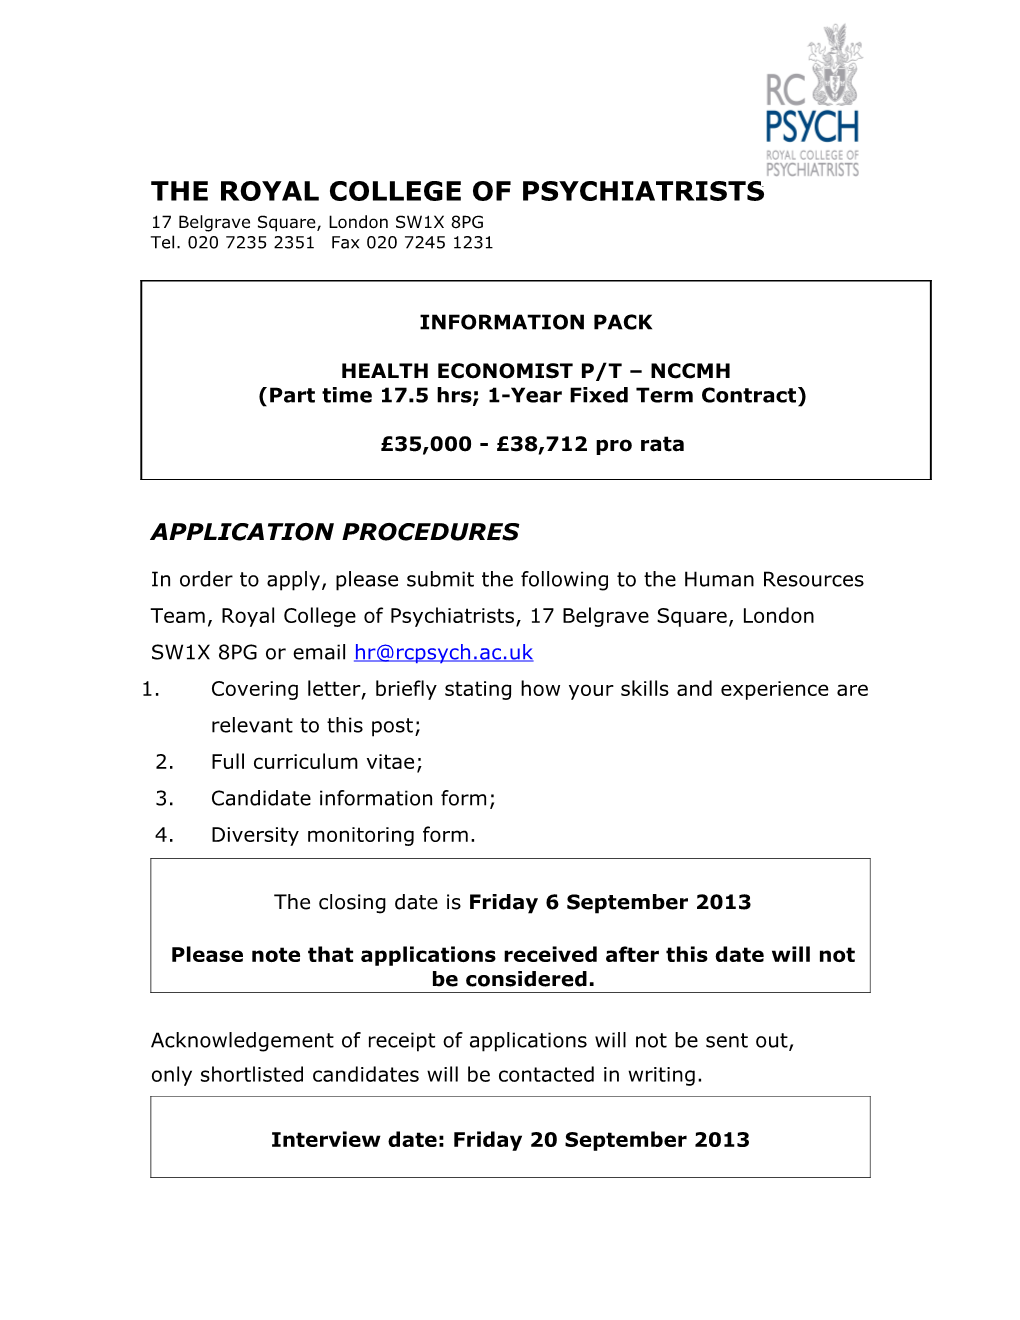 The Royal College of Psychiatrists s2